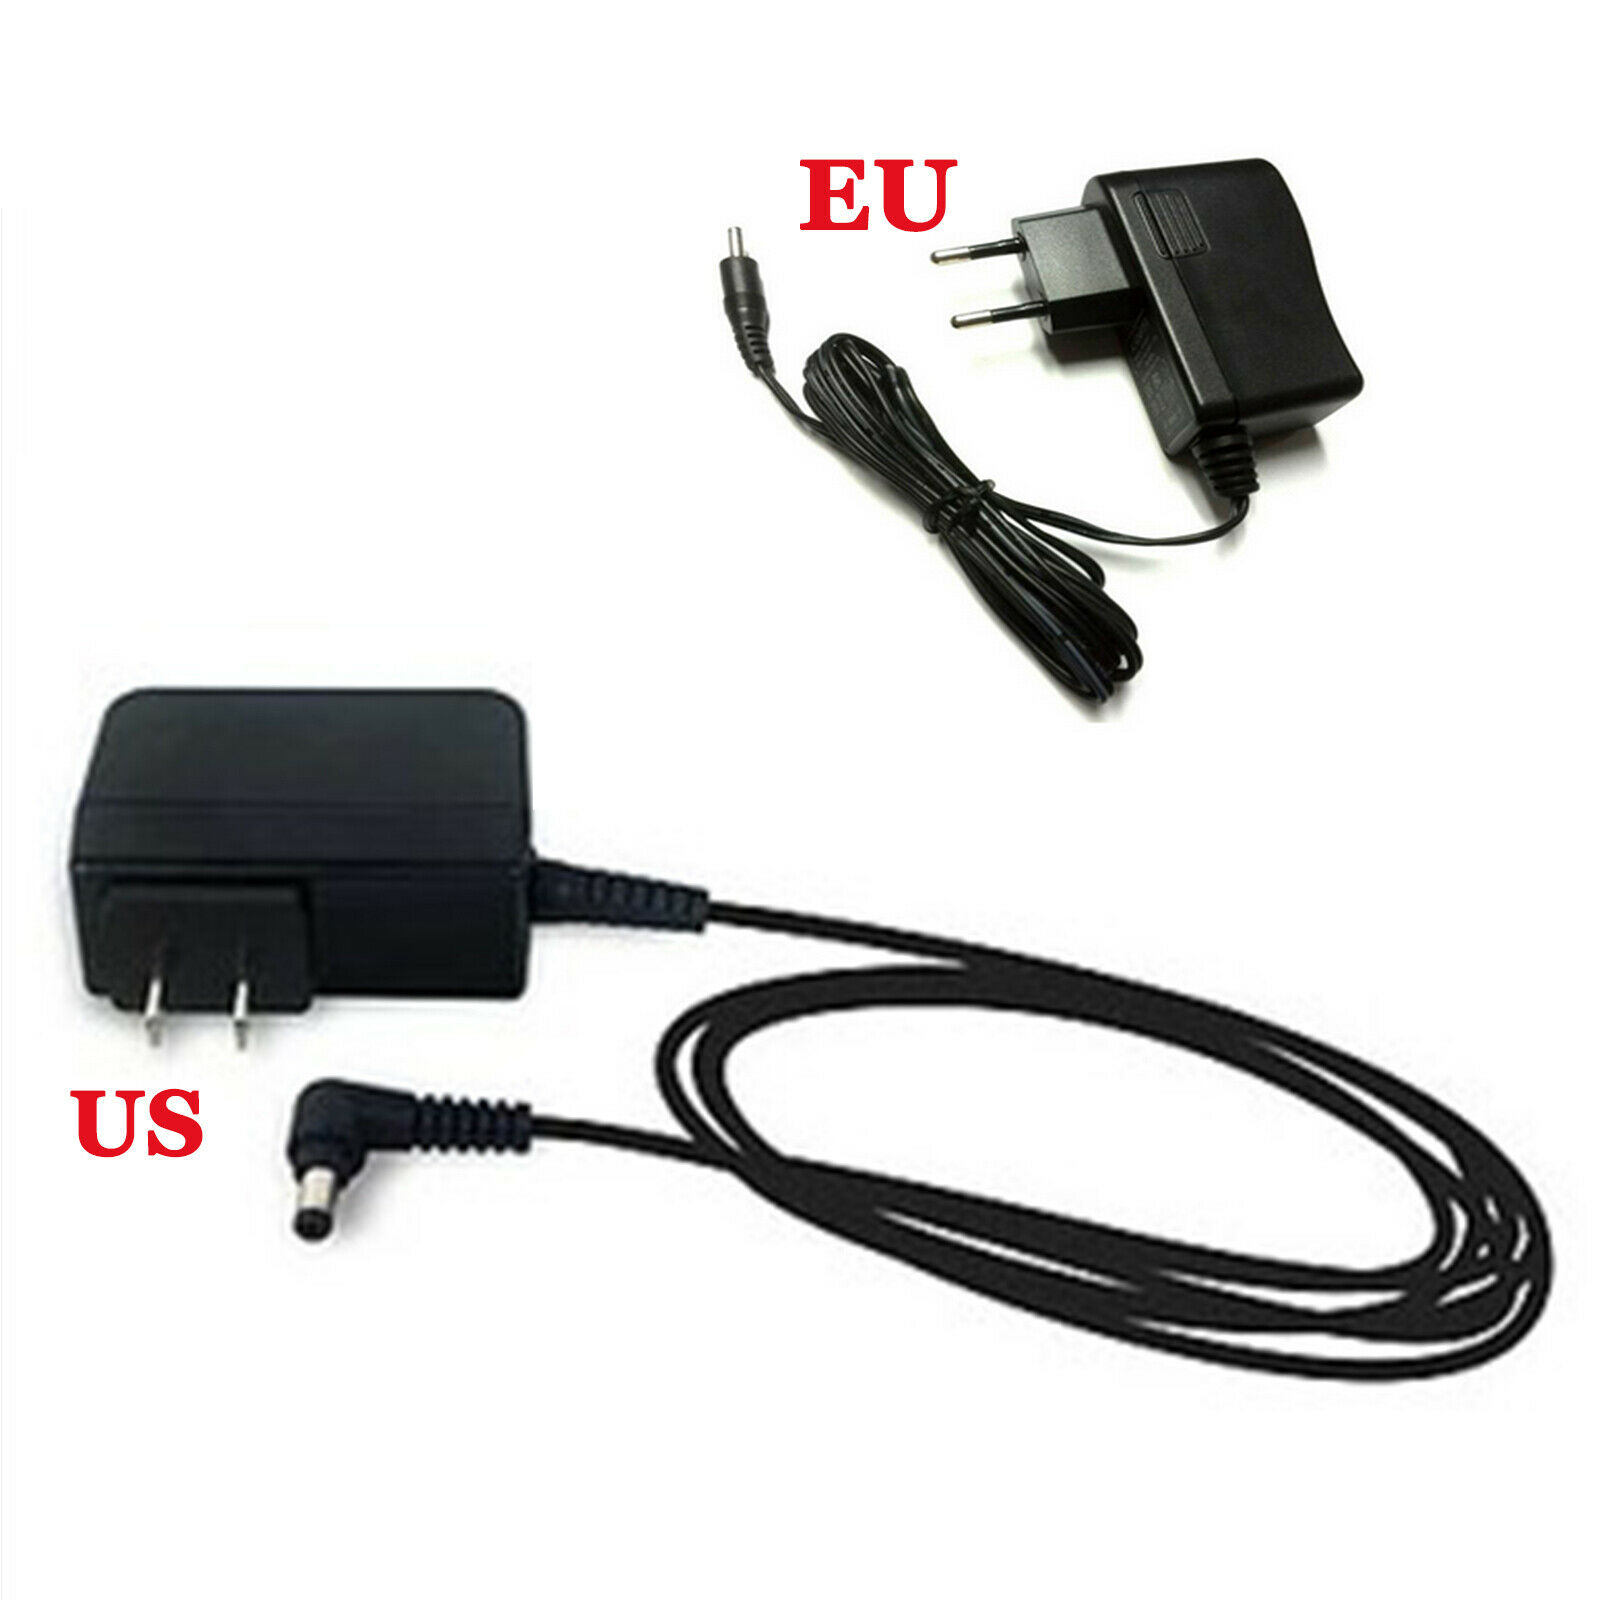 US or EU Power Charger for iRobot Braava 380t 381 320 MINT 5200C 4200 Vacuum Cleaner Product Description US Power Charg - Click Image to Close